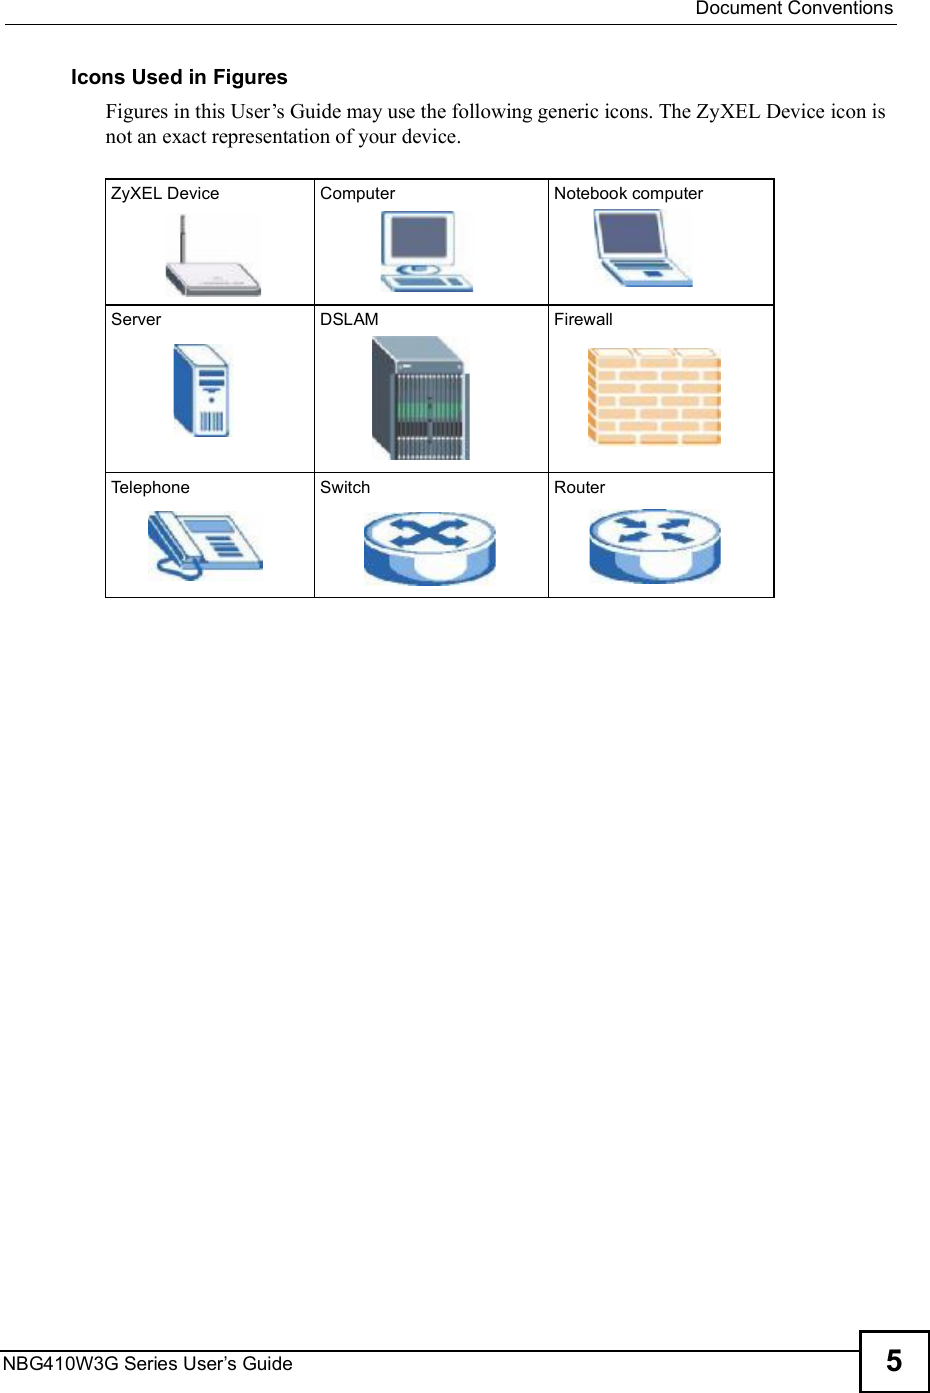  Document ConventionsNBG410W3G Series User s Guide 5Icons Used in FiguresFigures in this User!s Guide may use the following generic icons. The ZyXEL Device icon is not an exact representation of your device.ZyXEL Device Computer Notebook computerServer DSLAM FirewallTelephone Switch Router